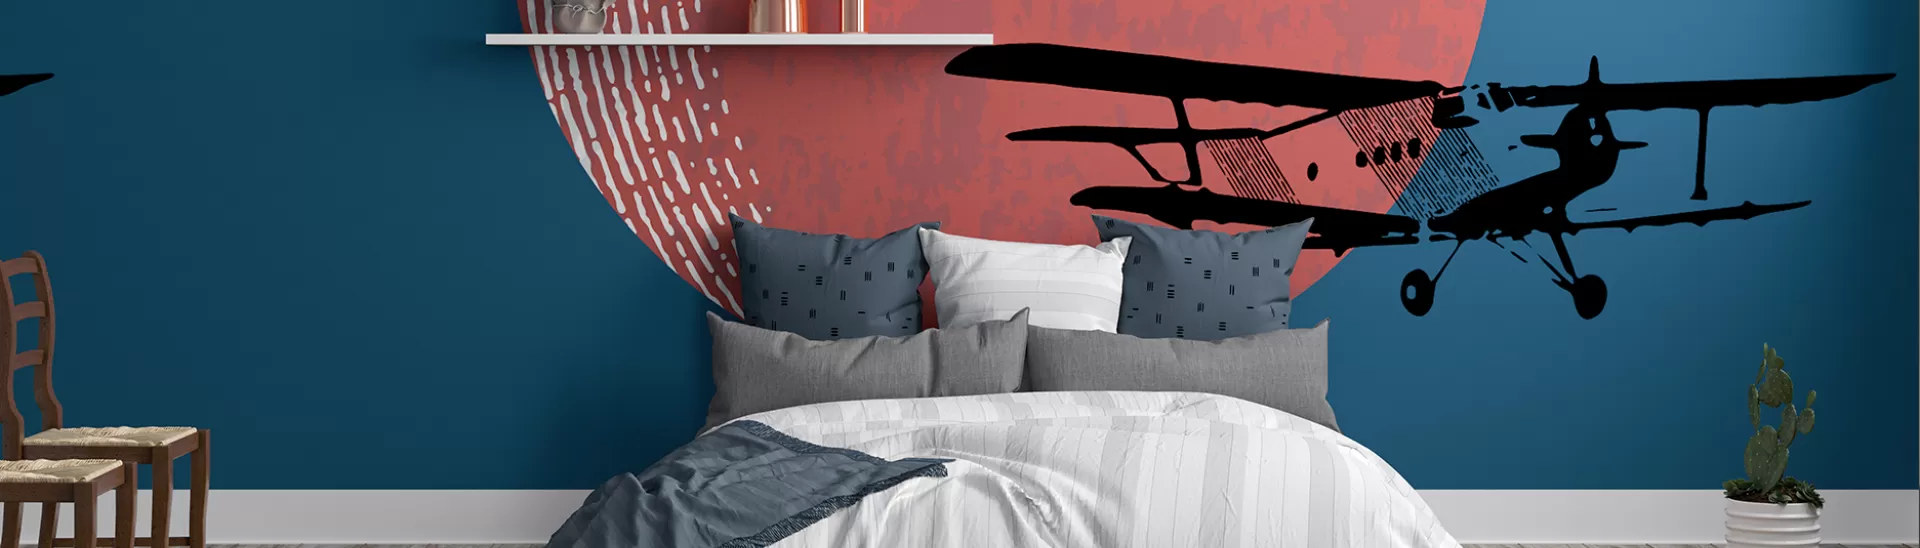 Top 5 Bedroom Interior Colour Combination For Teenager’s